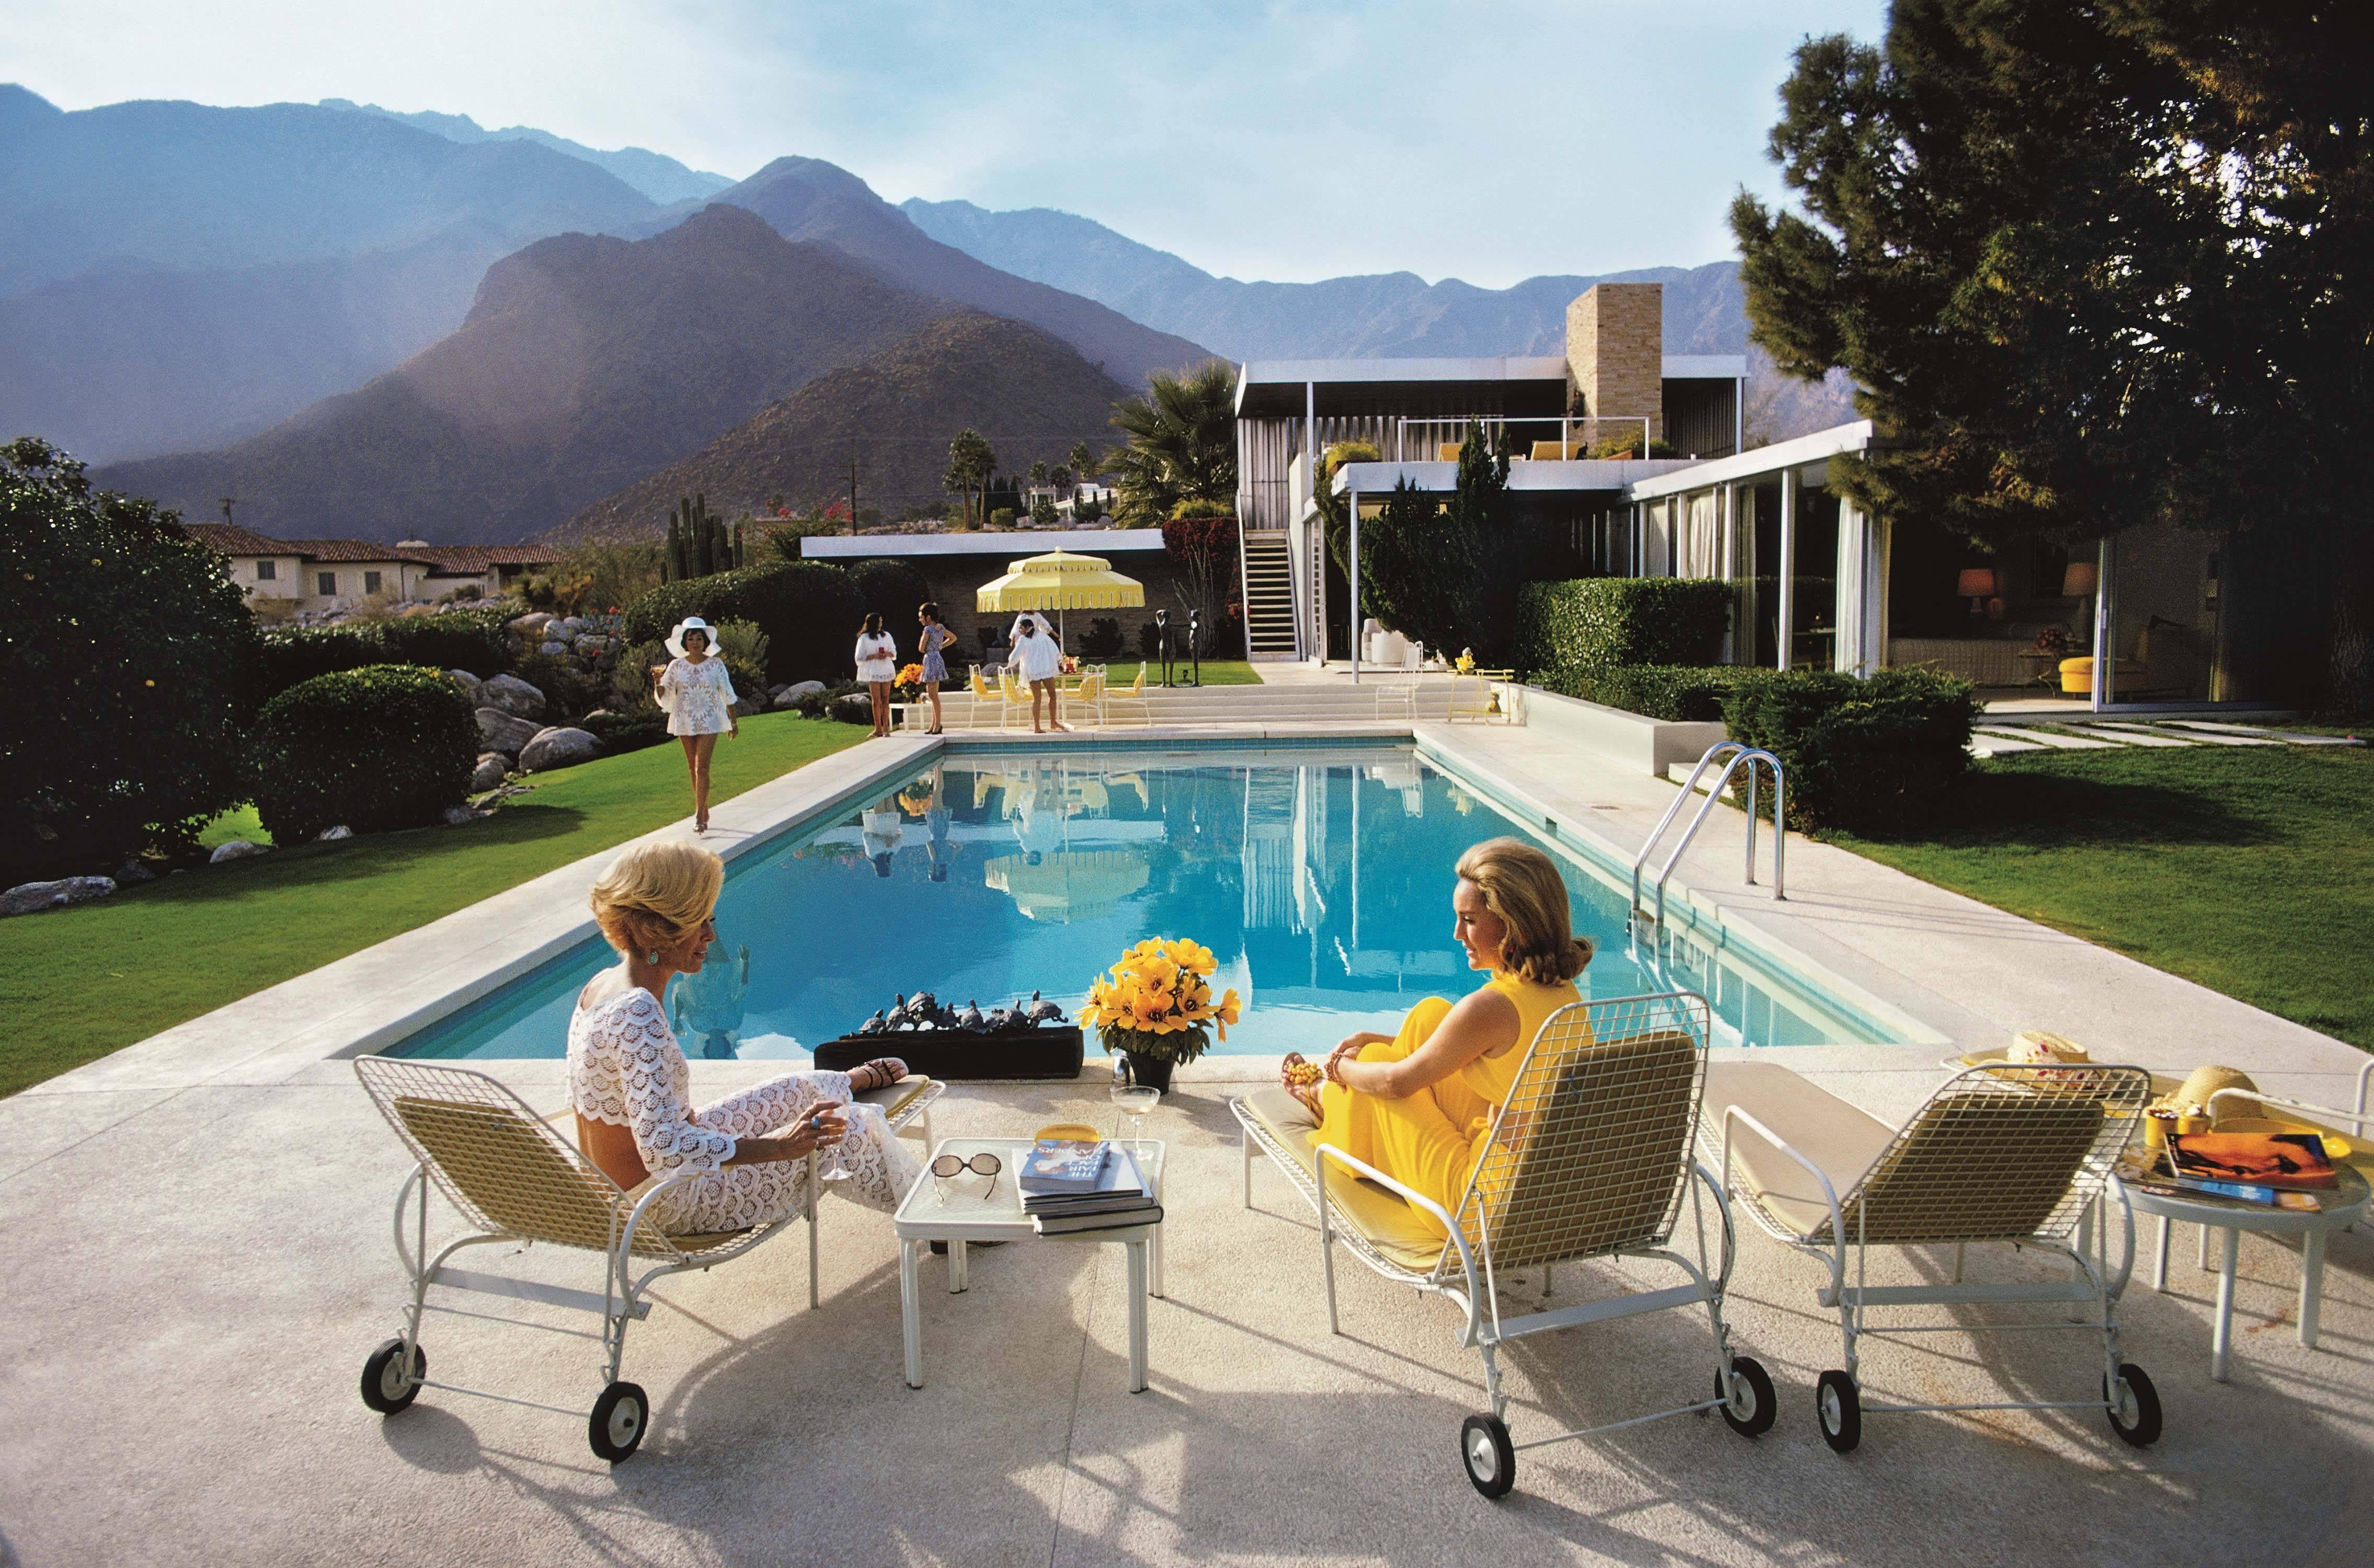 A desert house in Palm Springs designed by Richard Neutra for Edgar Kaufman. Lita Baron approaches Nelda Linsk, right, wife of art dealer Joseph Linsk who is talking to a friend, Helen Dzo Dzo.  

48 x 72 inches
$7930

40 x 60 inches
$7020

30 x 40